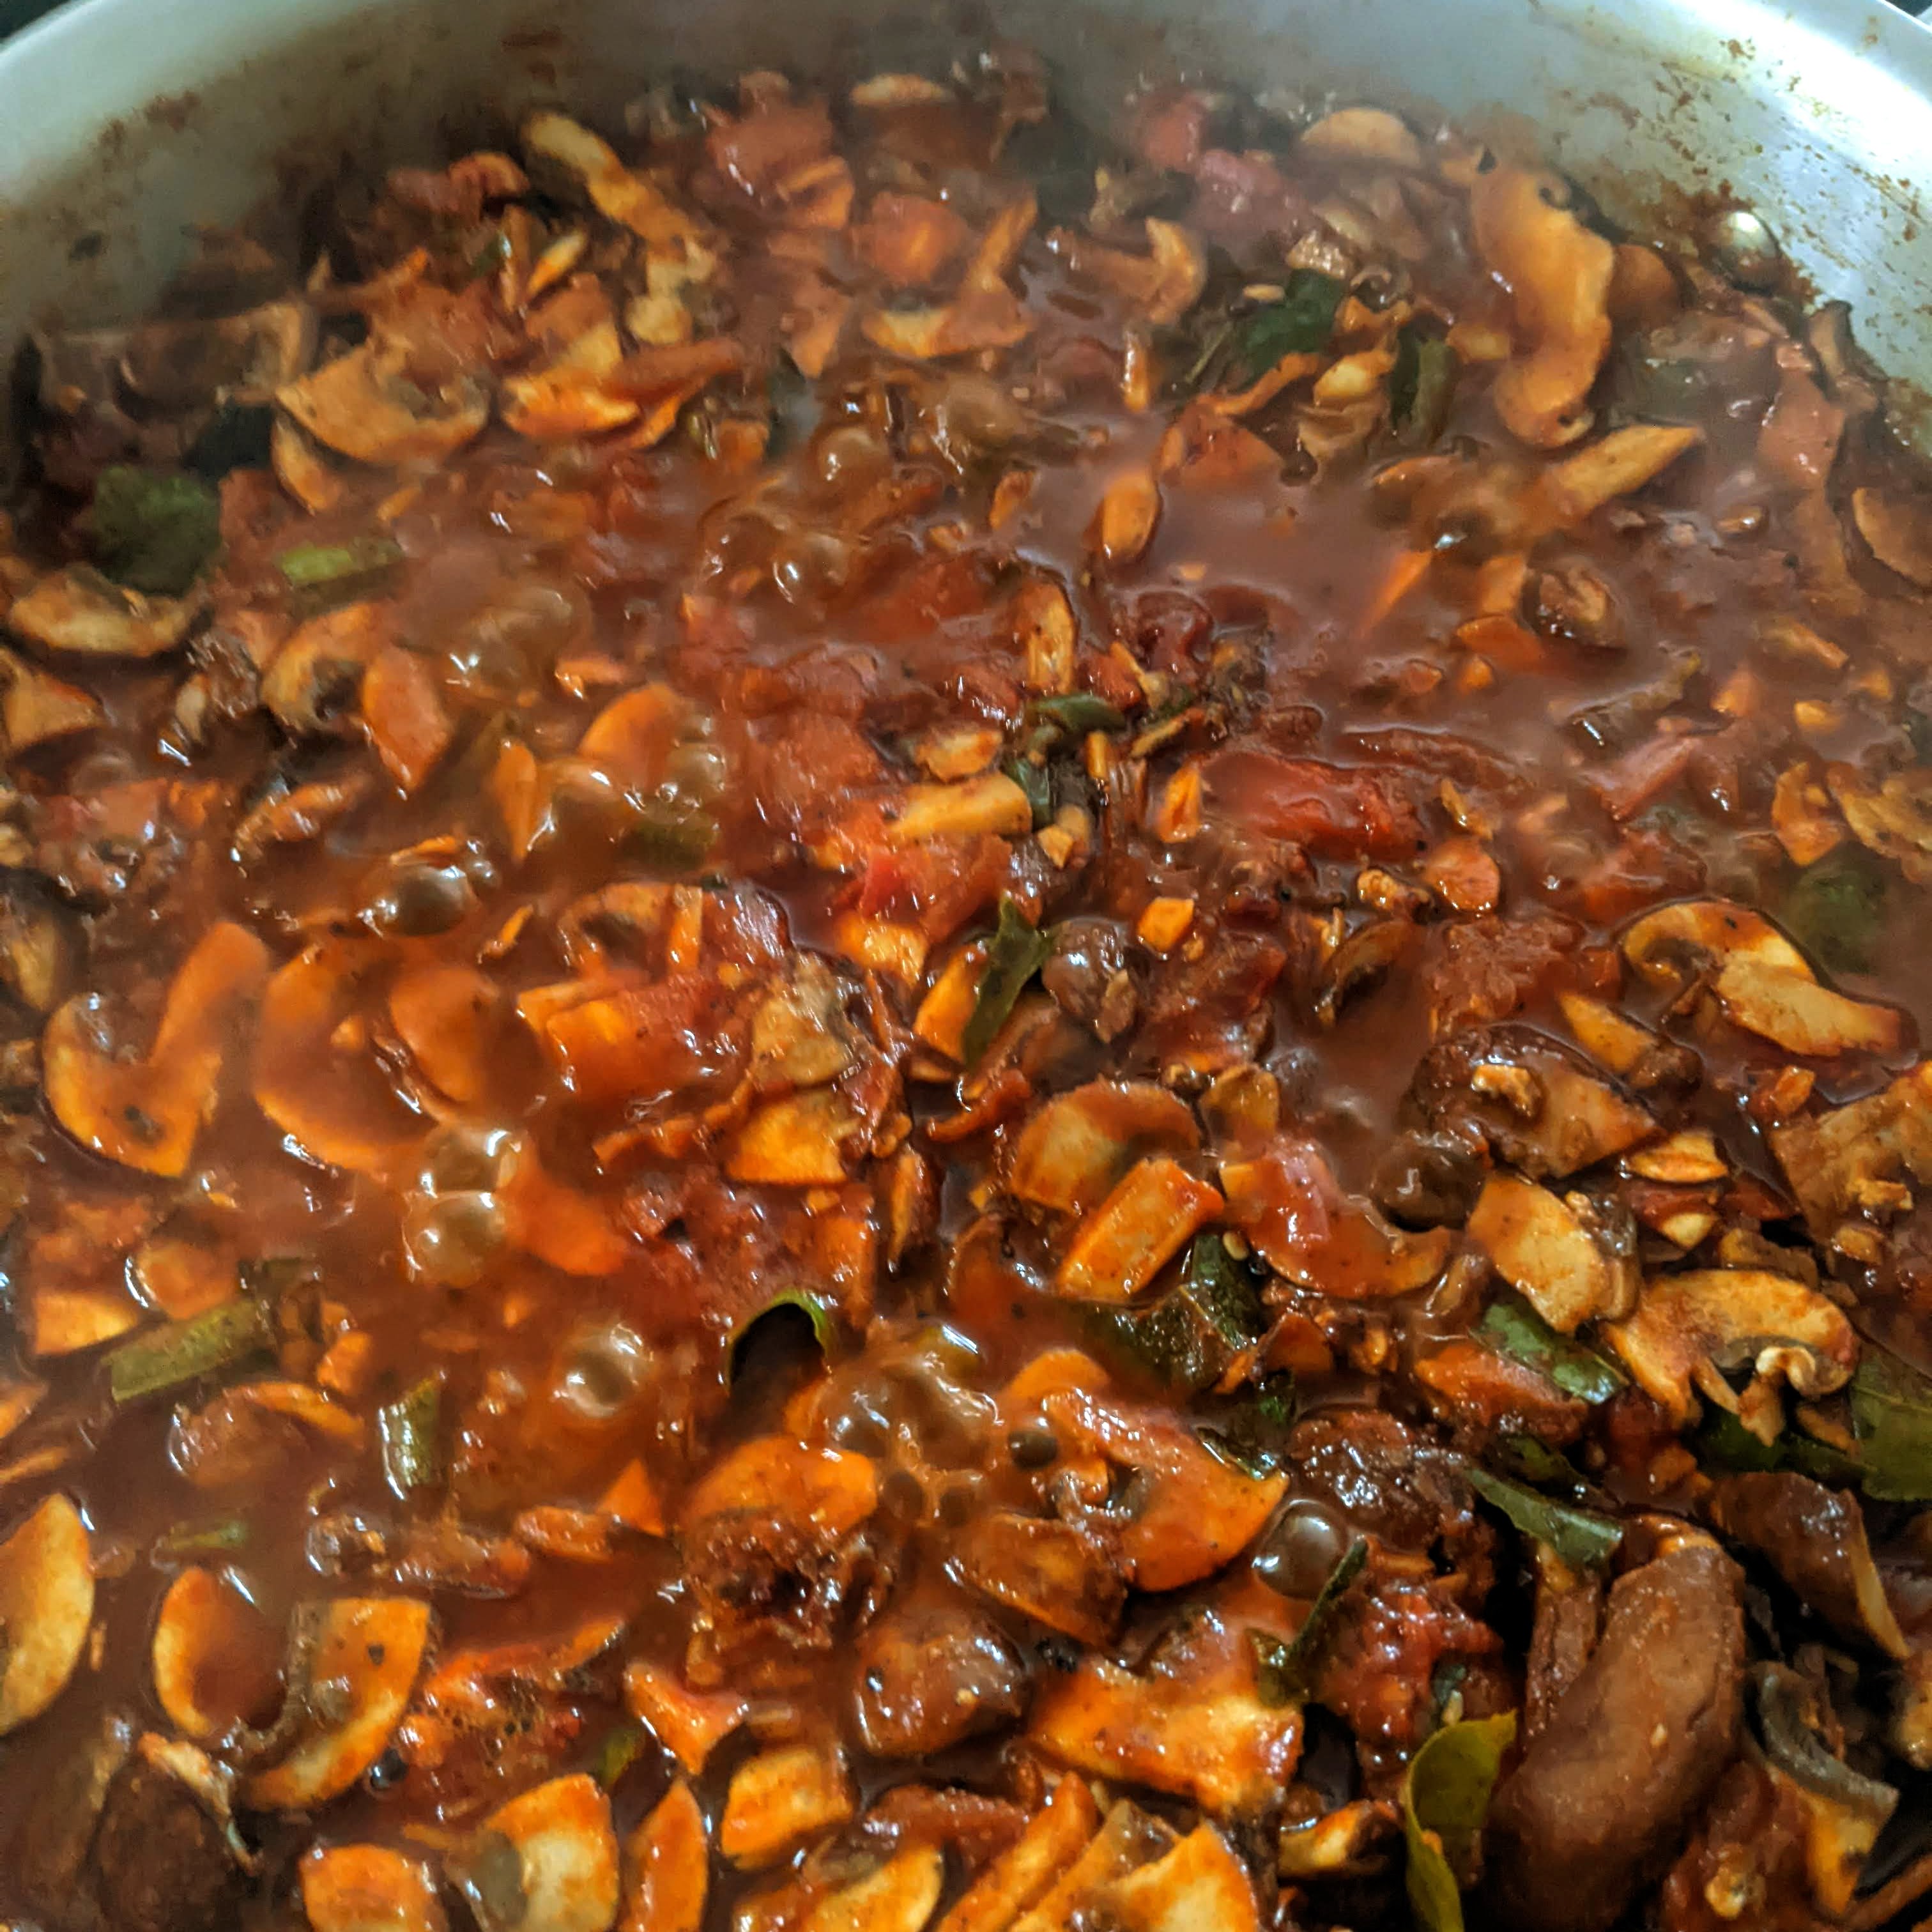 Spicy mushroom chili to warm up the colder days